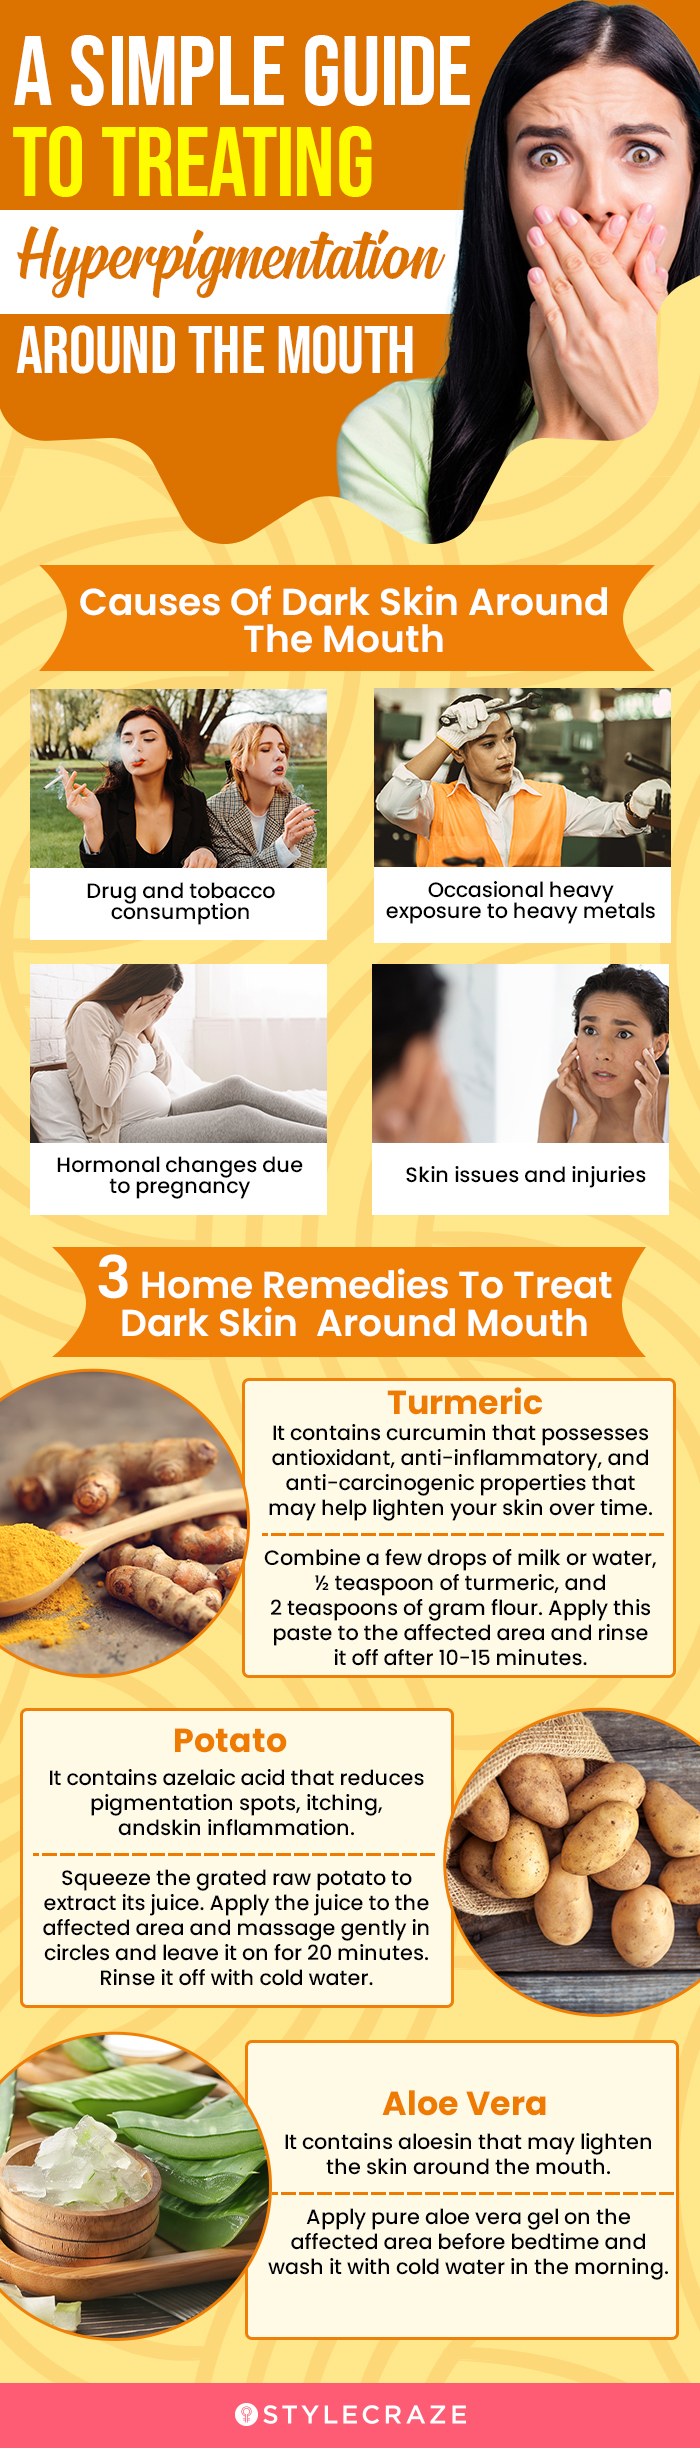 a simple guide to treating hyperpigmentation around the mouth (infographic)